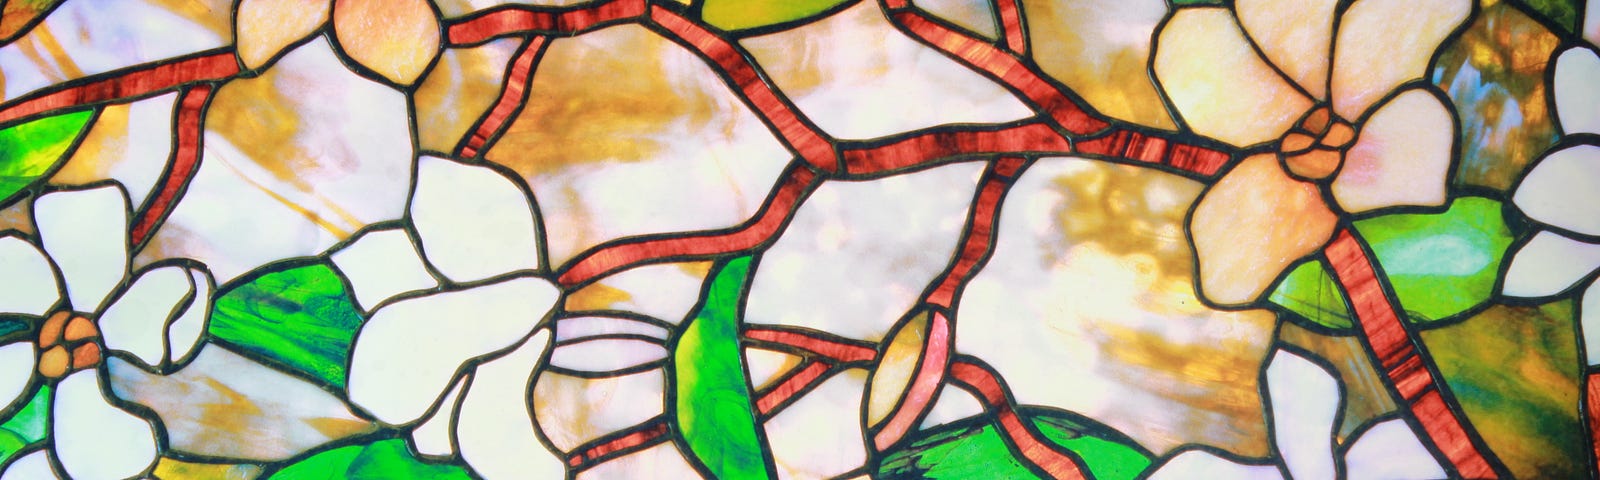 A stained-glass window of tree branches with white and cream blossoms.